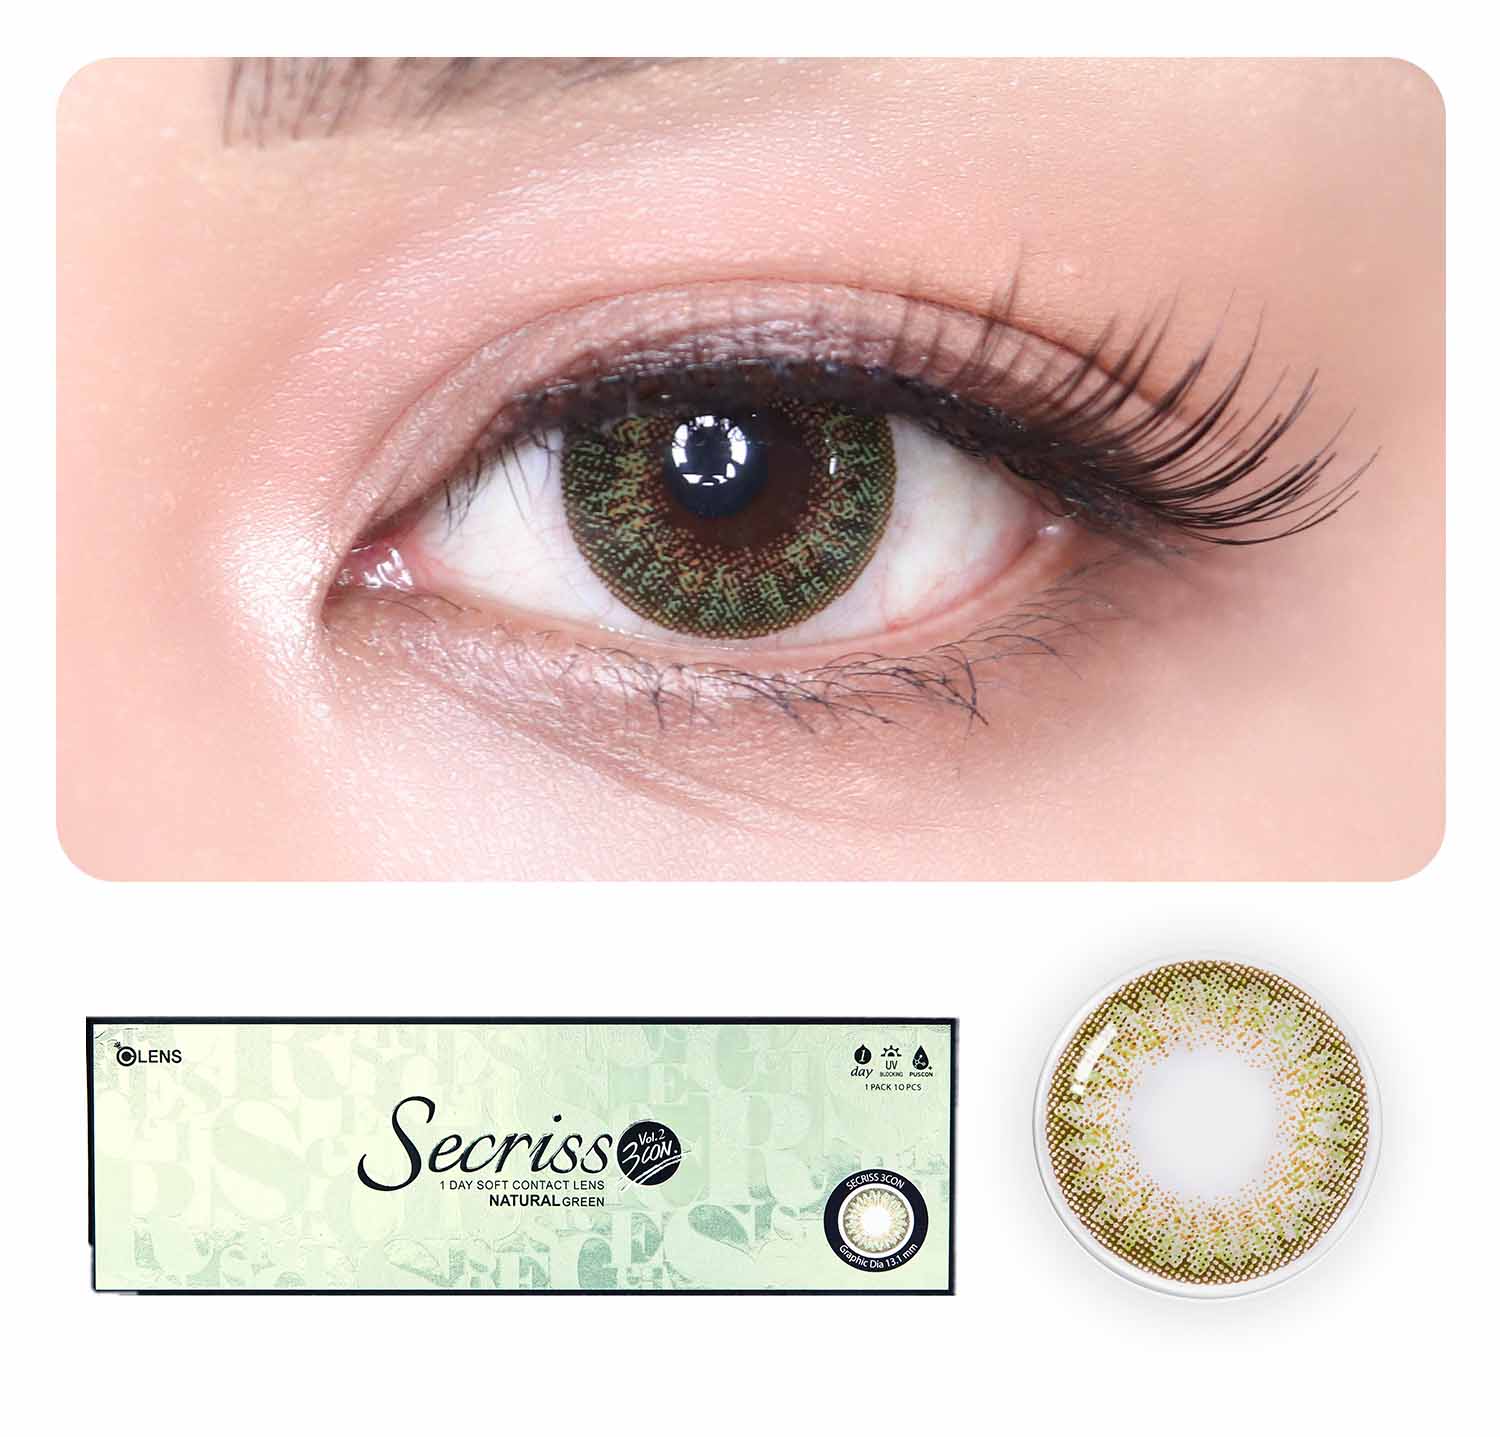  OLENS Premium Color Contact Lens | secriss lens 1 day disposable trial Pack | o-lens.co.in